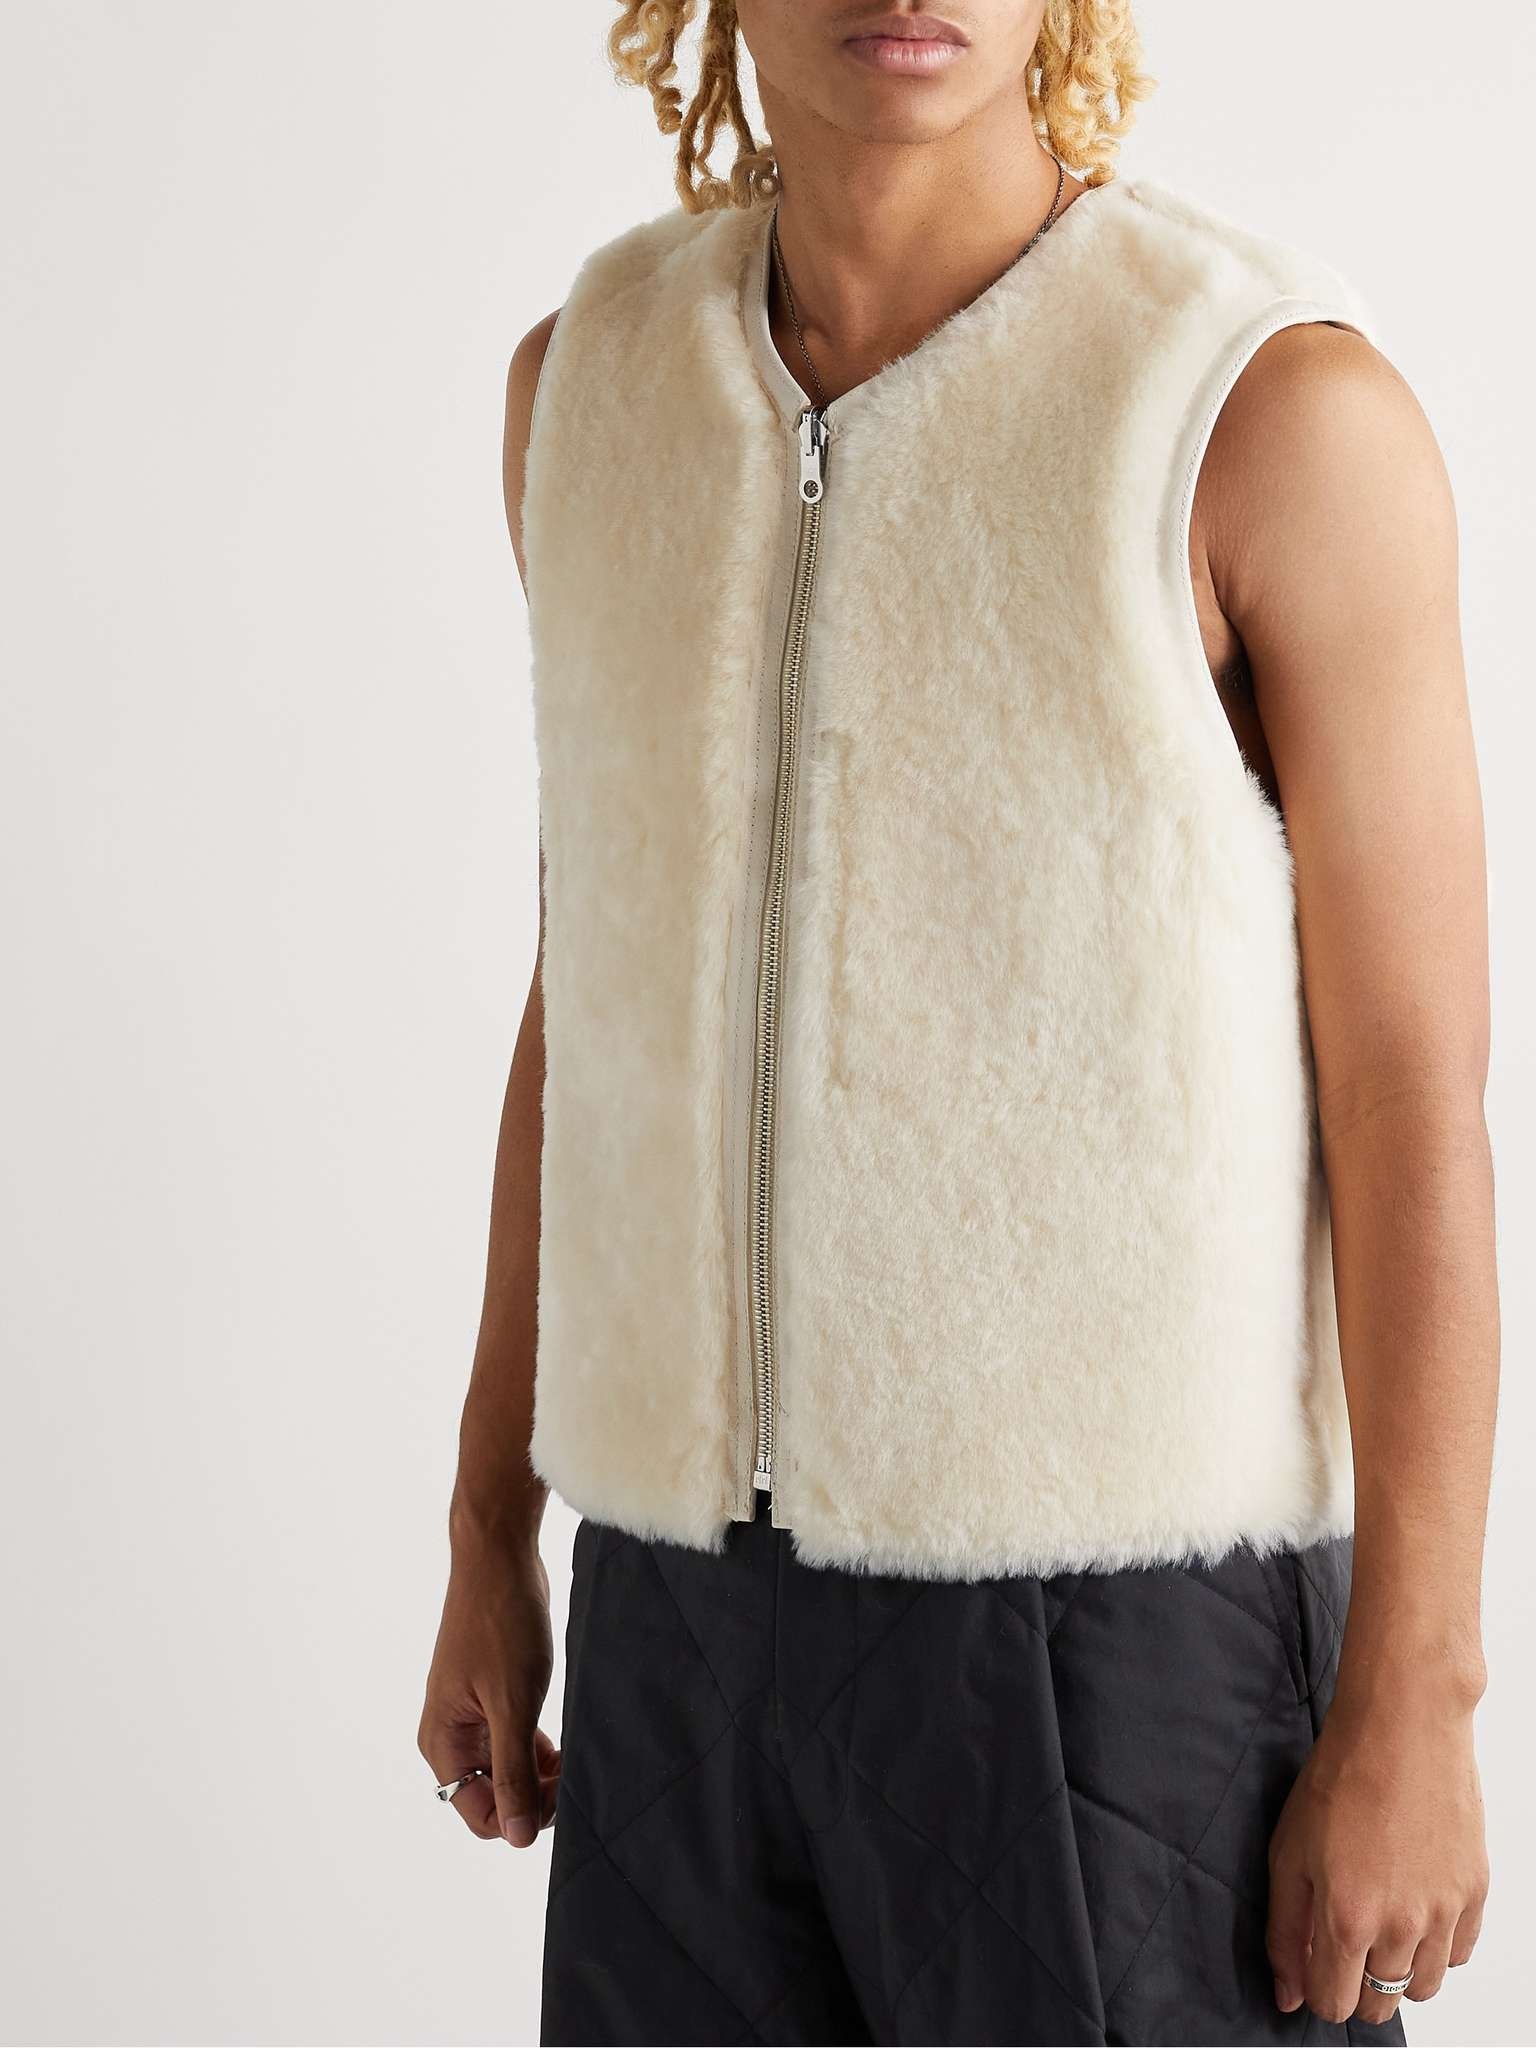 Reversible Shearling and Leather Vest - 4